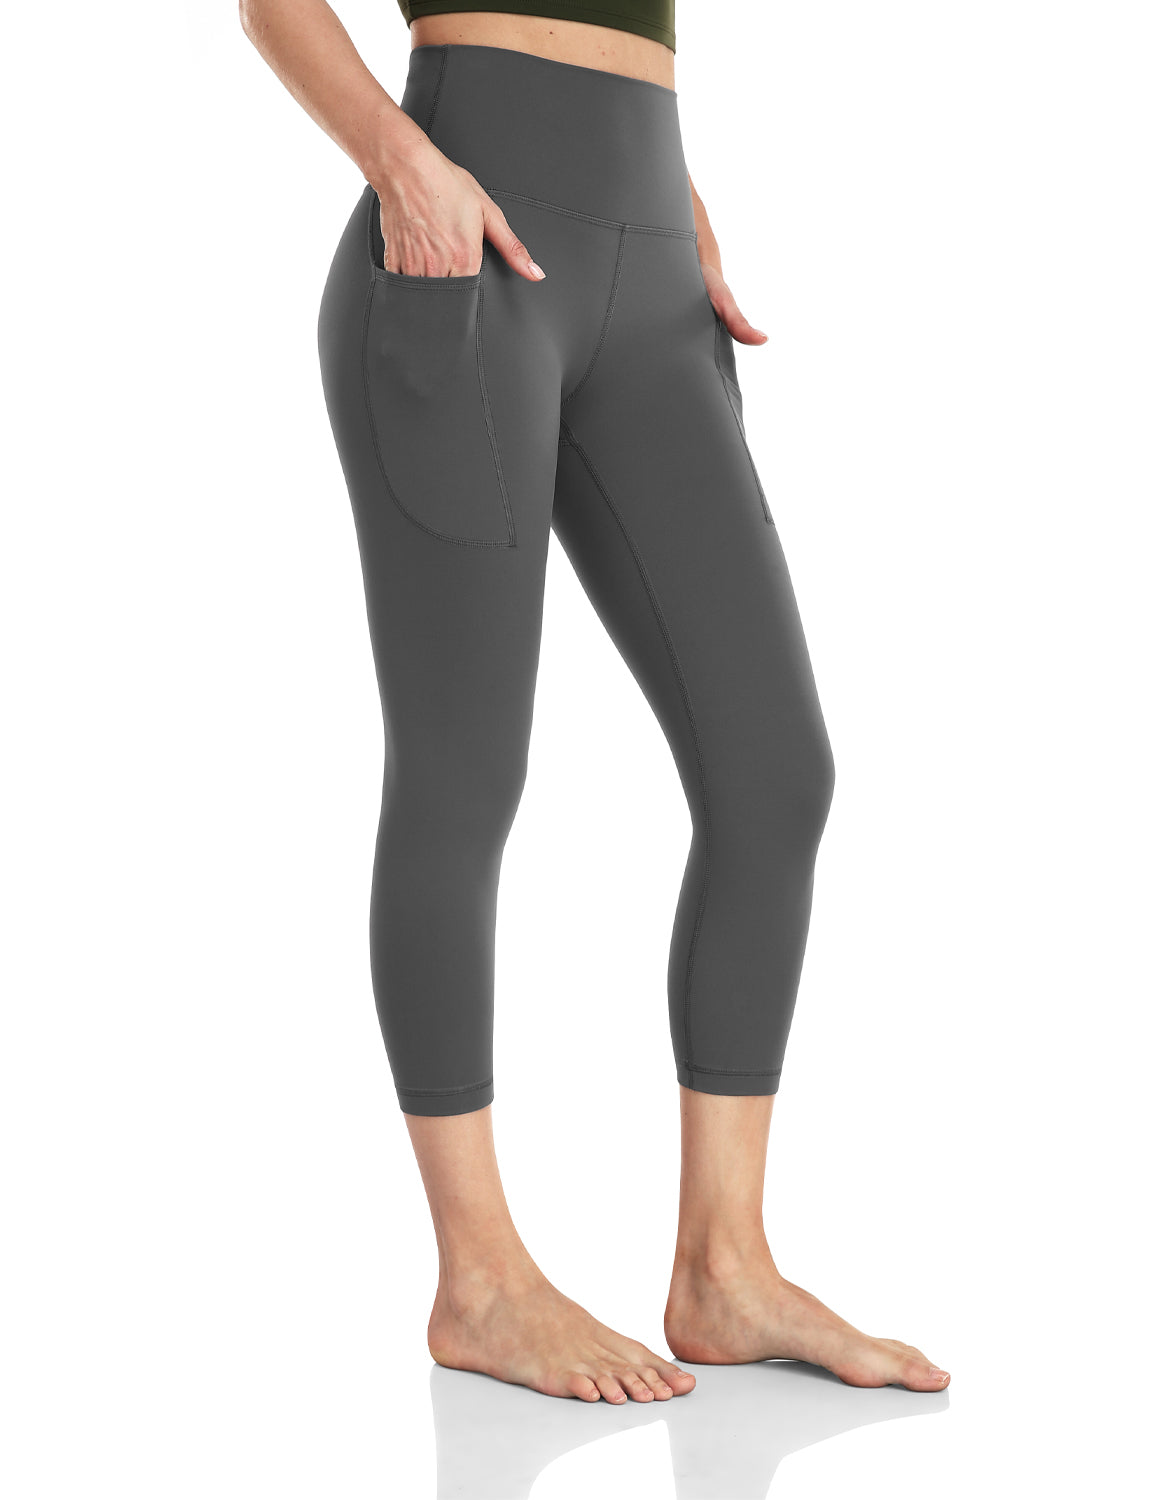 HeyNuts Essential 7/8 Leggings - Buttery Soft and High Waisted